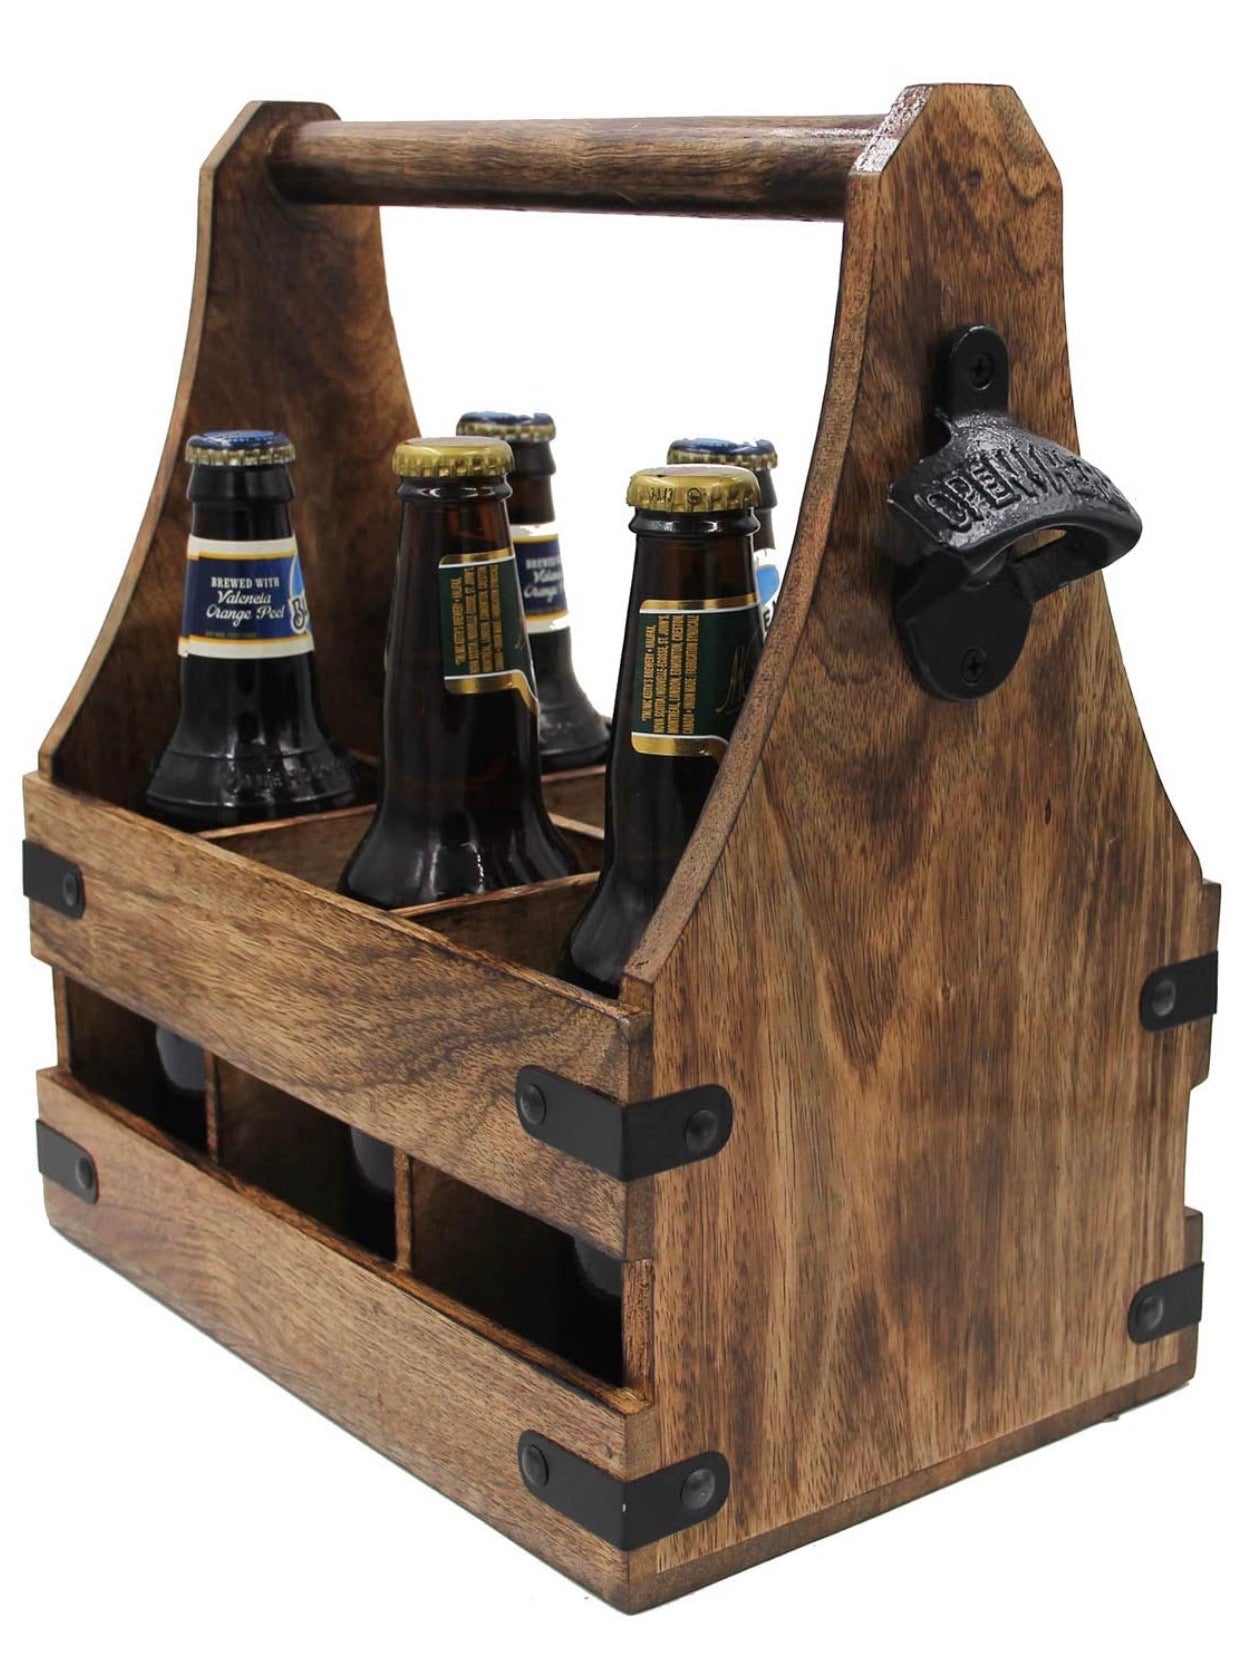 Large Vintage Beer Bottle Caddy With Bottle Opener Rustic Wood Carrier  Glass Bottle Holder, Wood Farmhouse Tote Serving Tray Garden Tool Box 